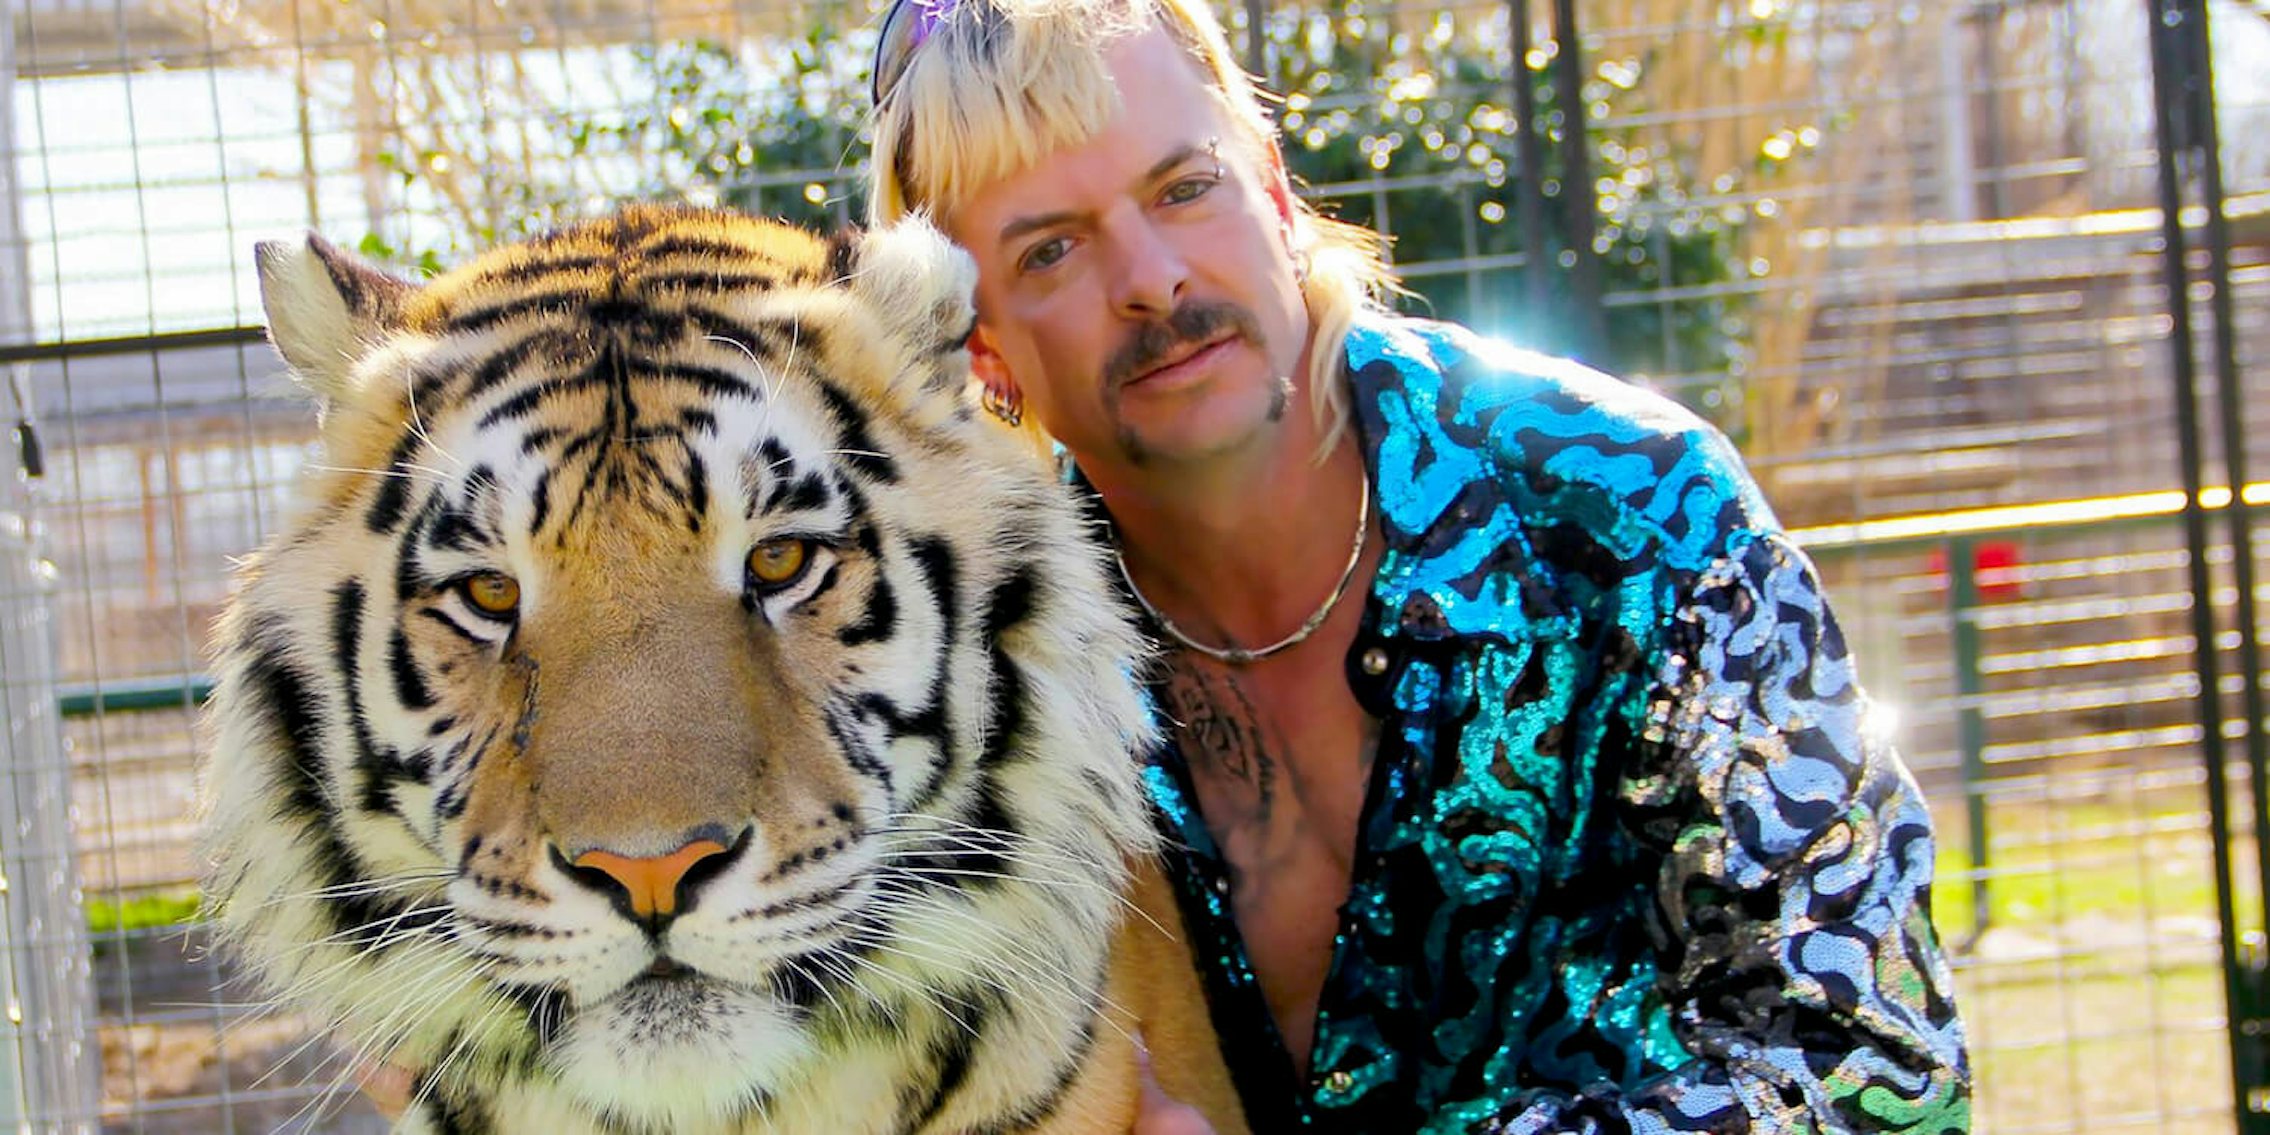 Tiger King Joe Exotic Investigation Discovery series